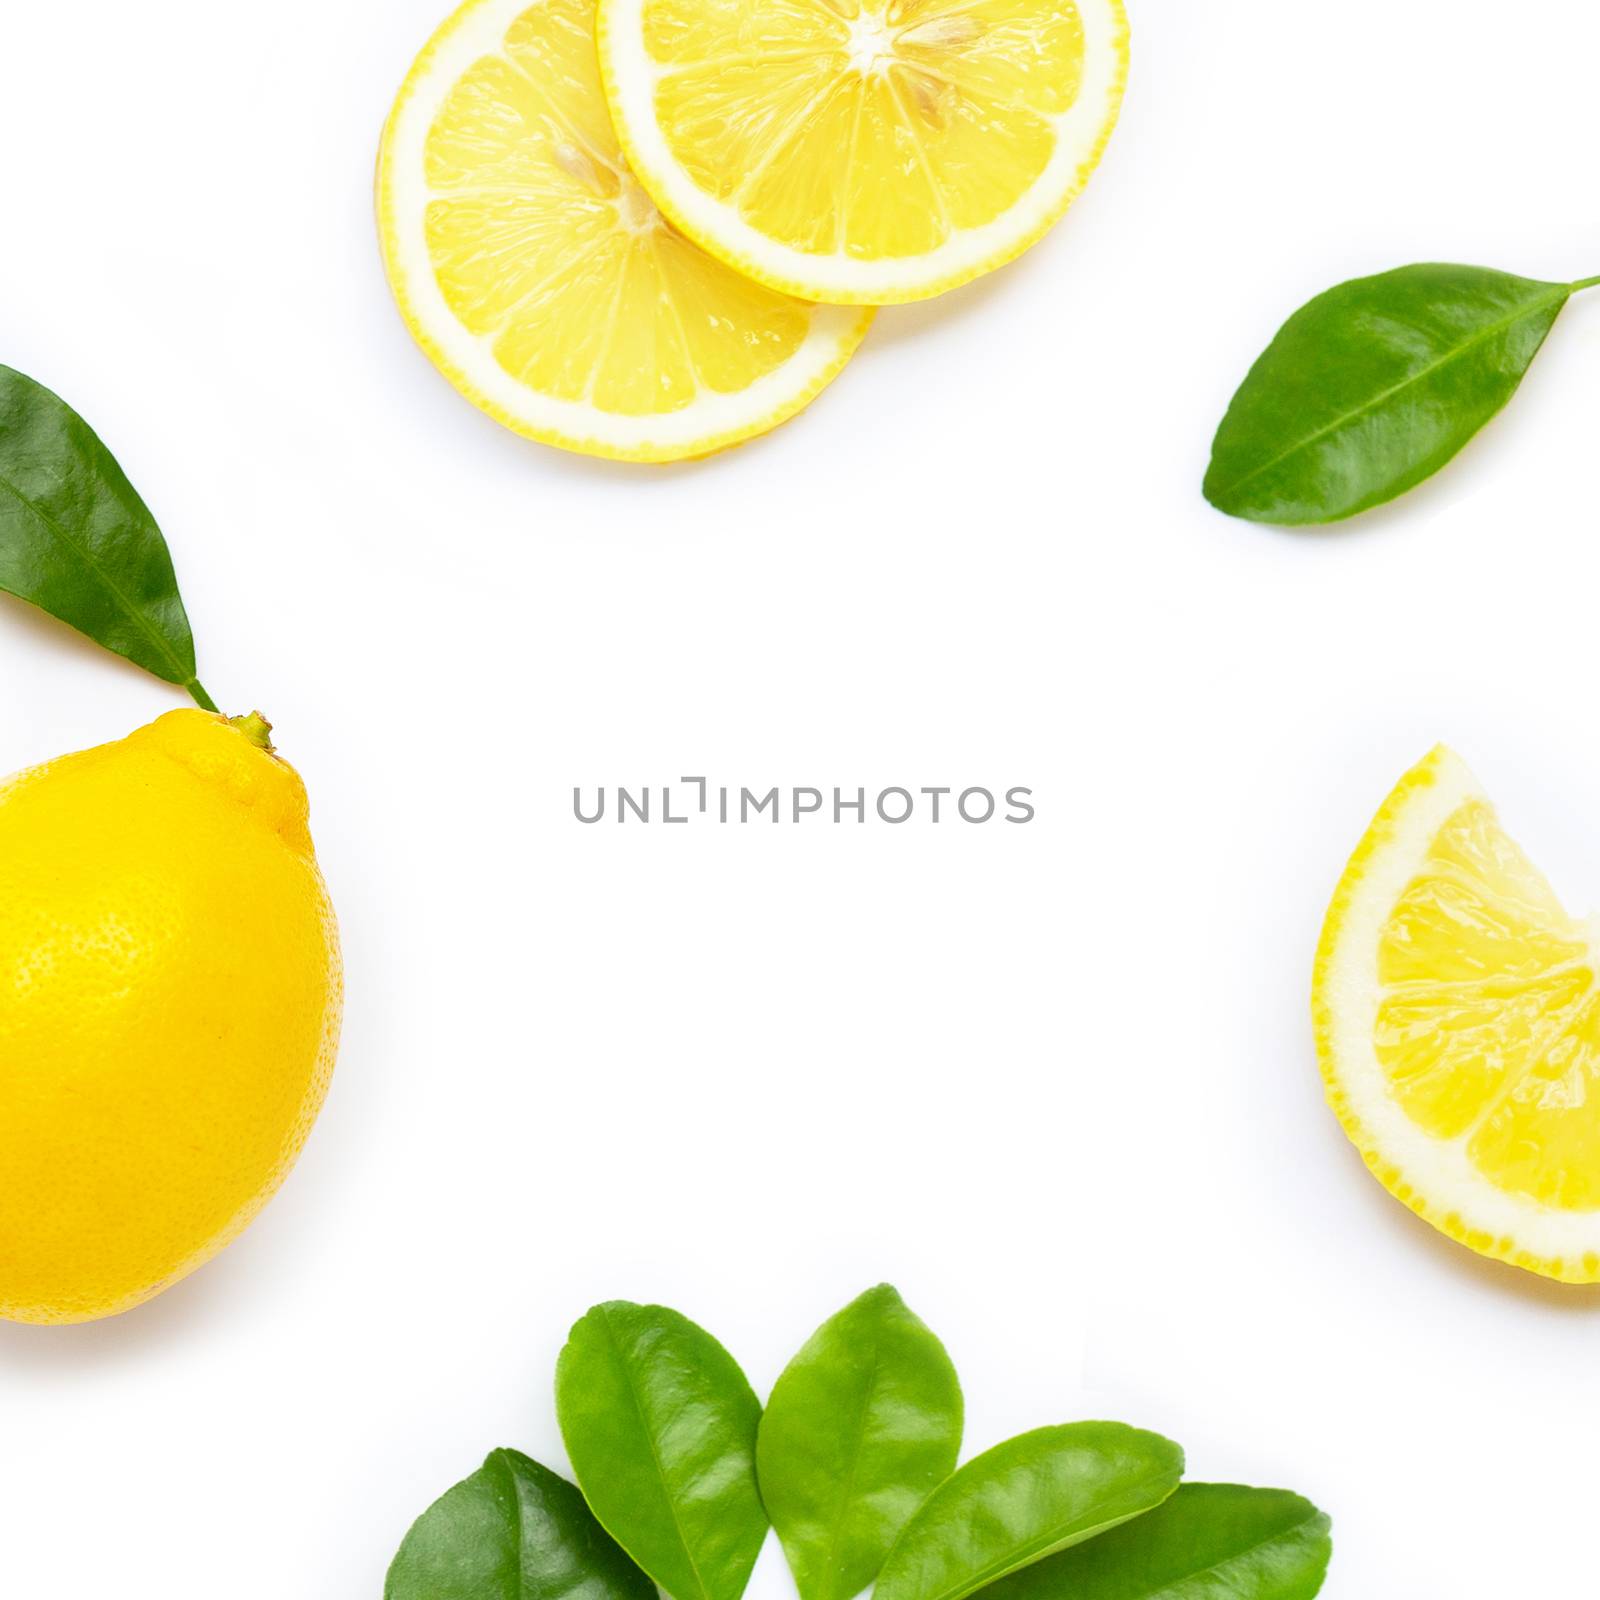 Frame made of fresh lemon and slices with leaves isolated on white background.